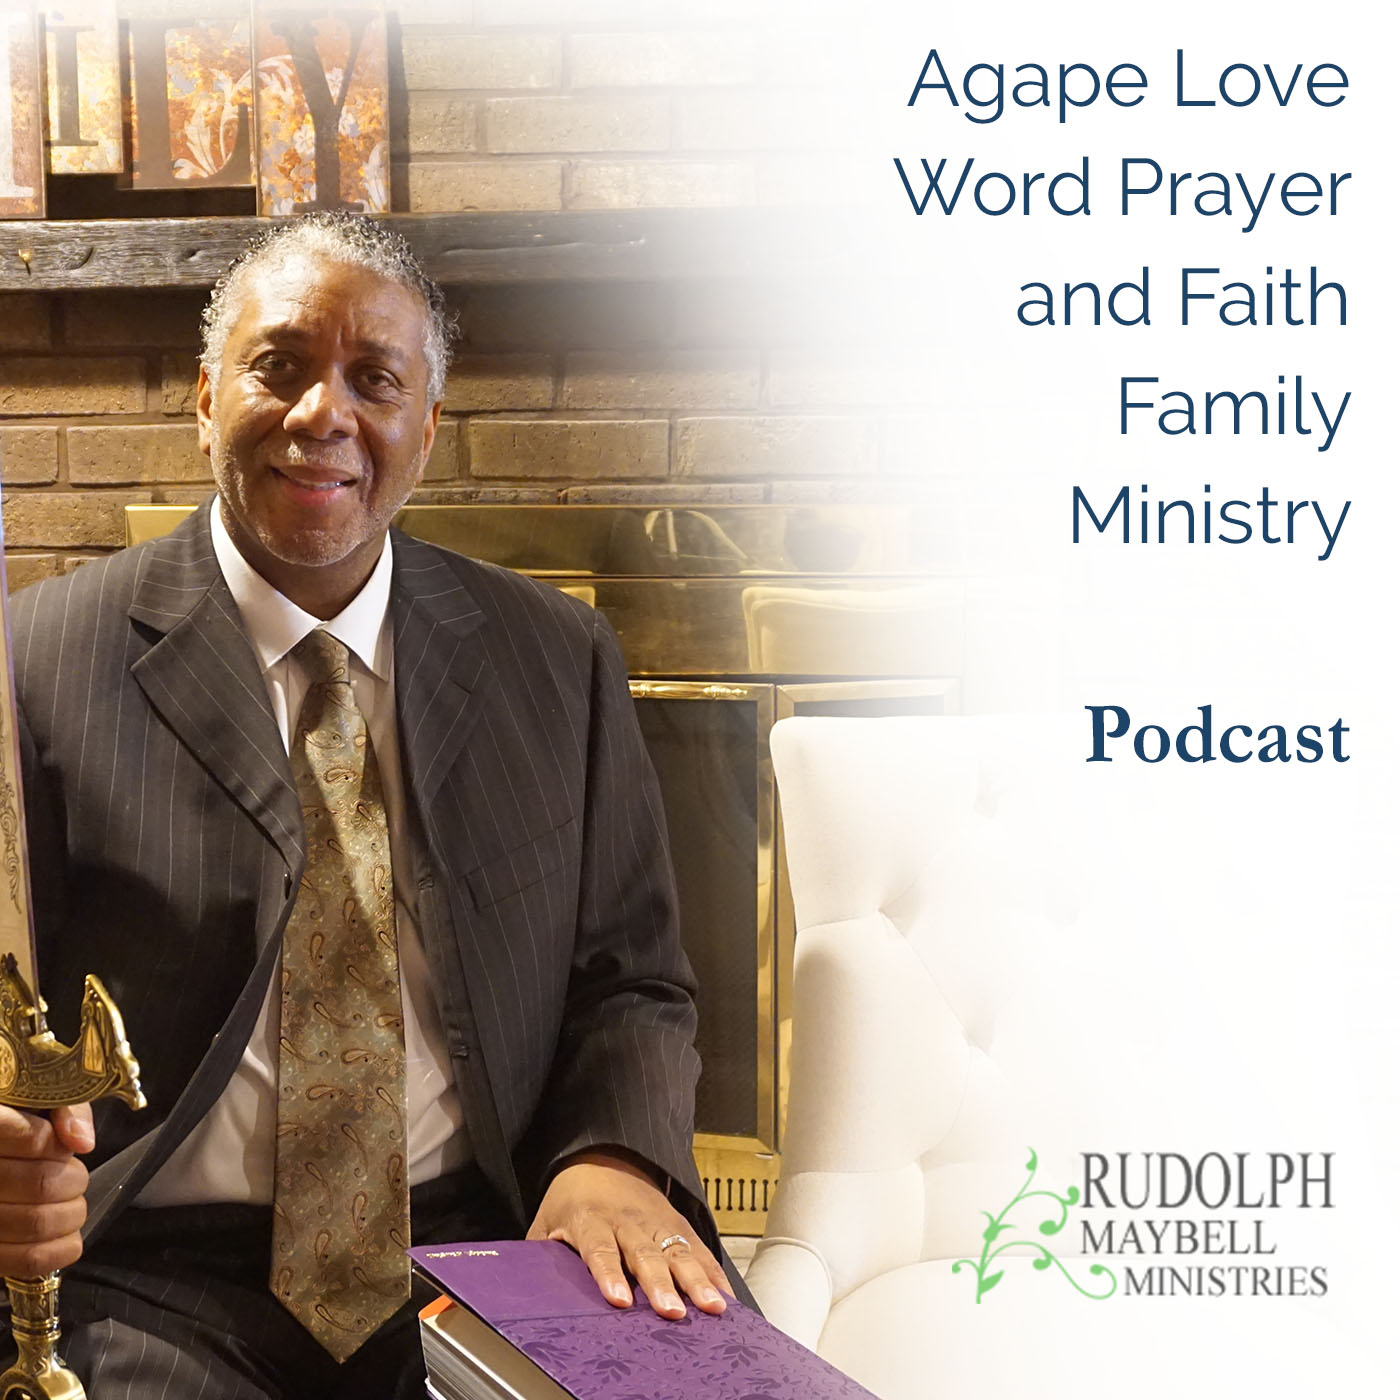 Rudolph Maybell Ministries Podcast